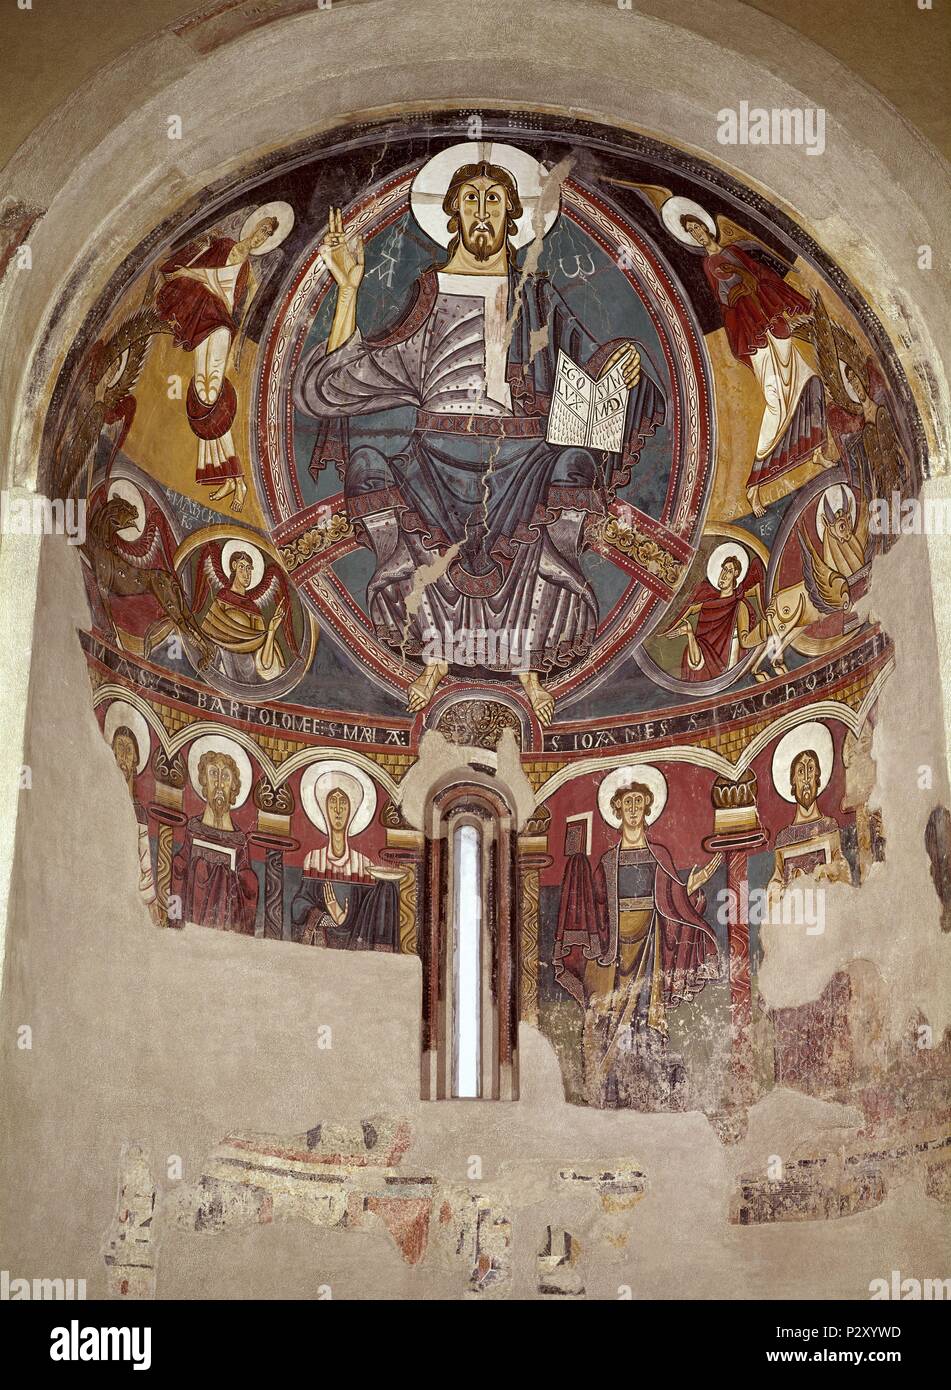 Detail of the apse. Christ Pantocrator of San Clement of Tahull. 12th century. Catalan romanesque art. Painting in fresco. Barcelona, Cataluña Museum of Art. Author: Master of Taüll (12th cent.). Location: MUSEU NACIONAL D'ART CATALUNYA, BARCELONA, SPAIN. Stock Photo